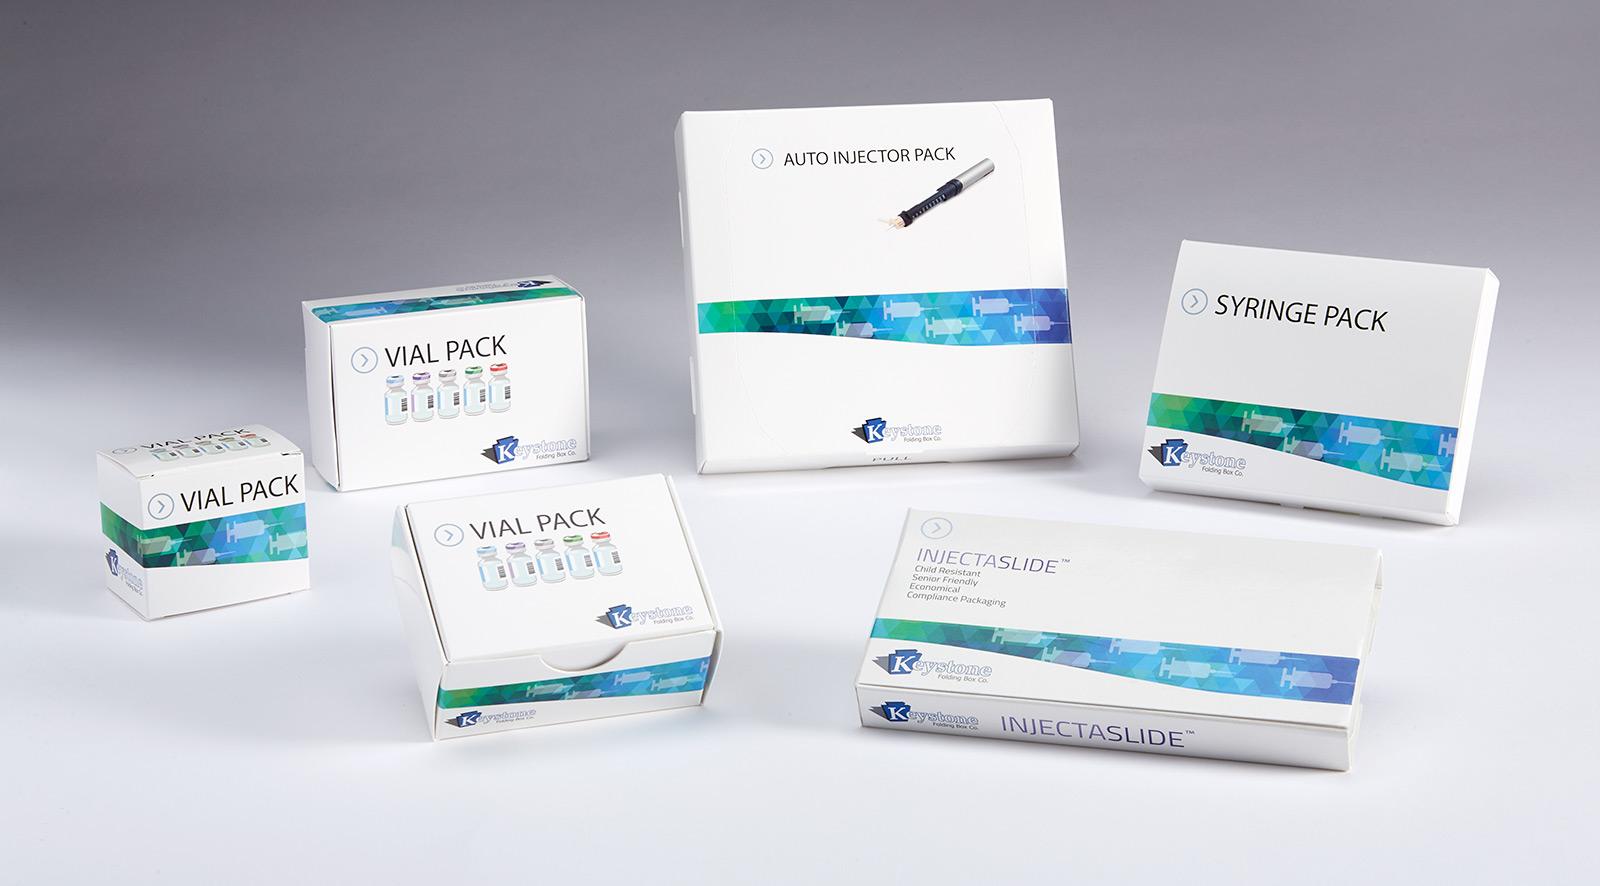 Product Injectable Packaging Products for Clinical Use - Keystone Folding Box Co. image